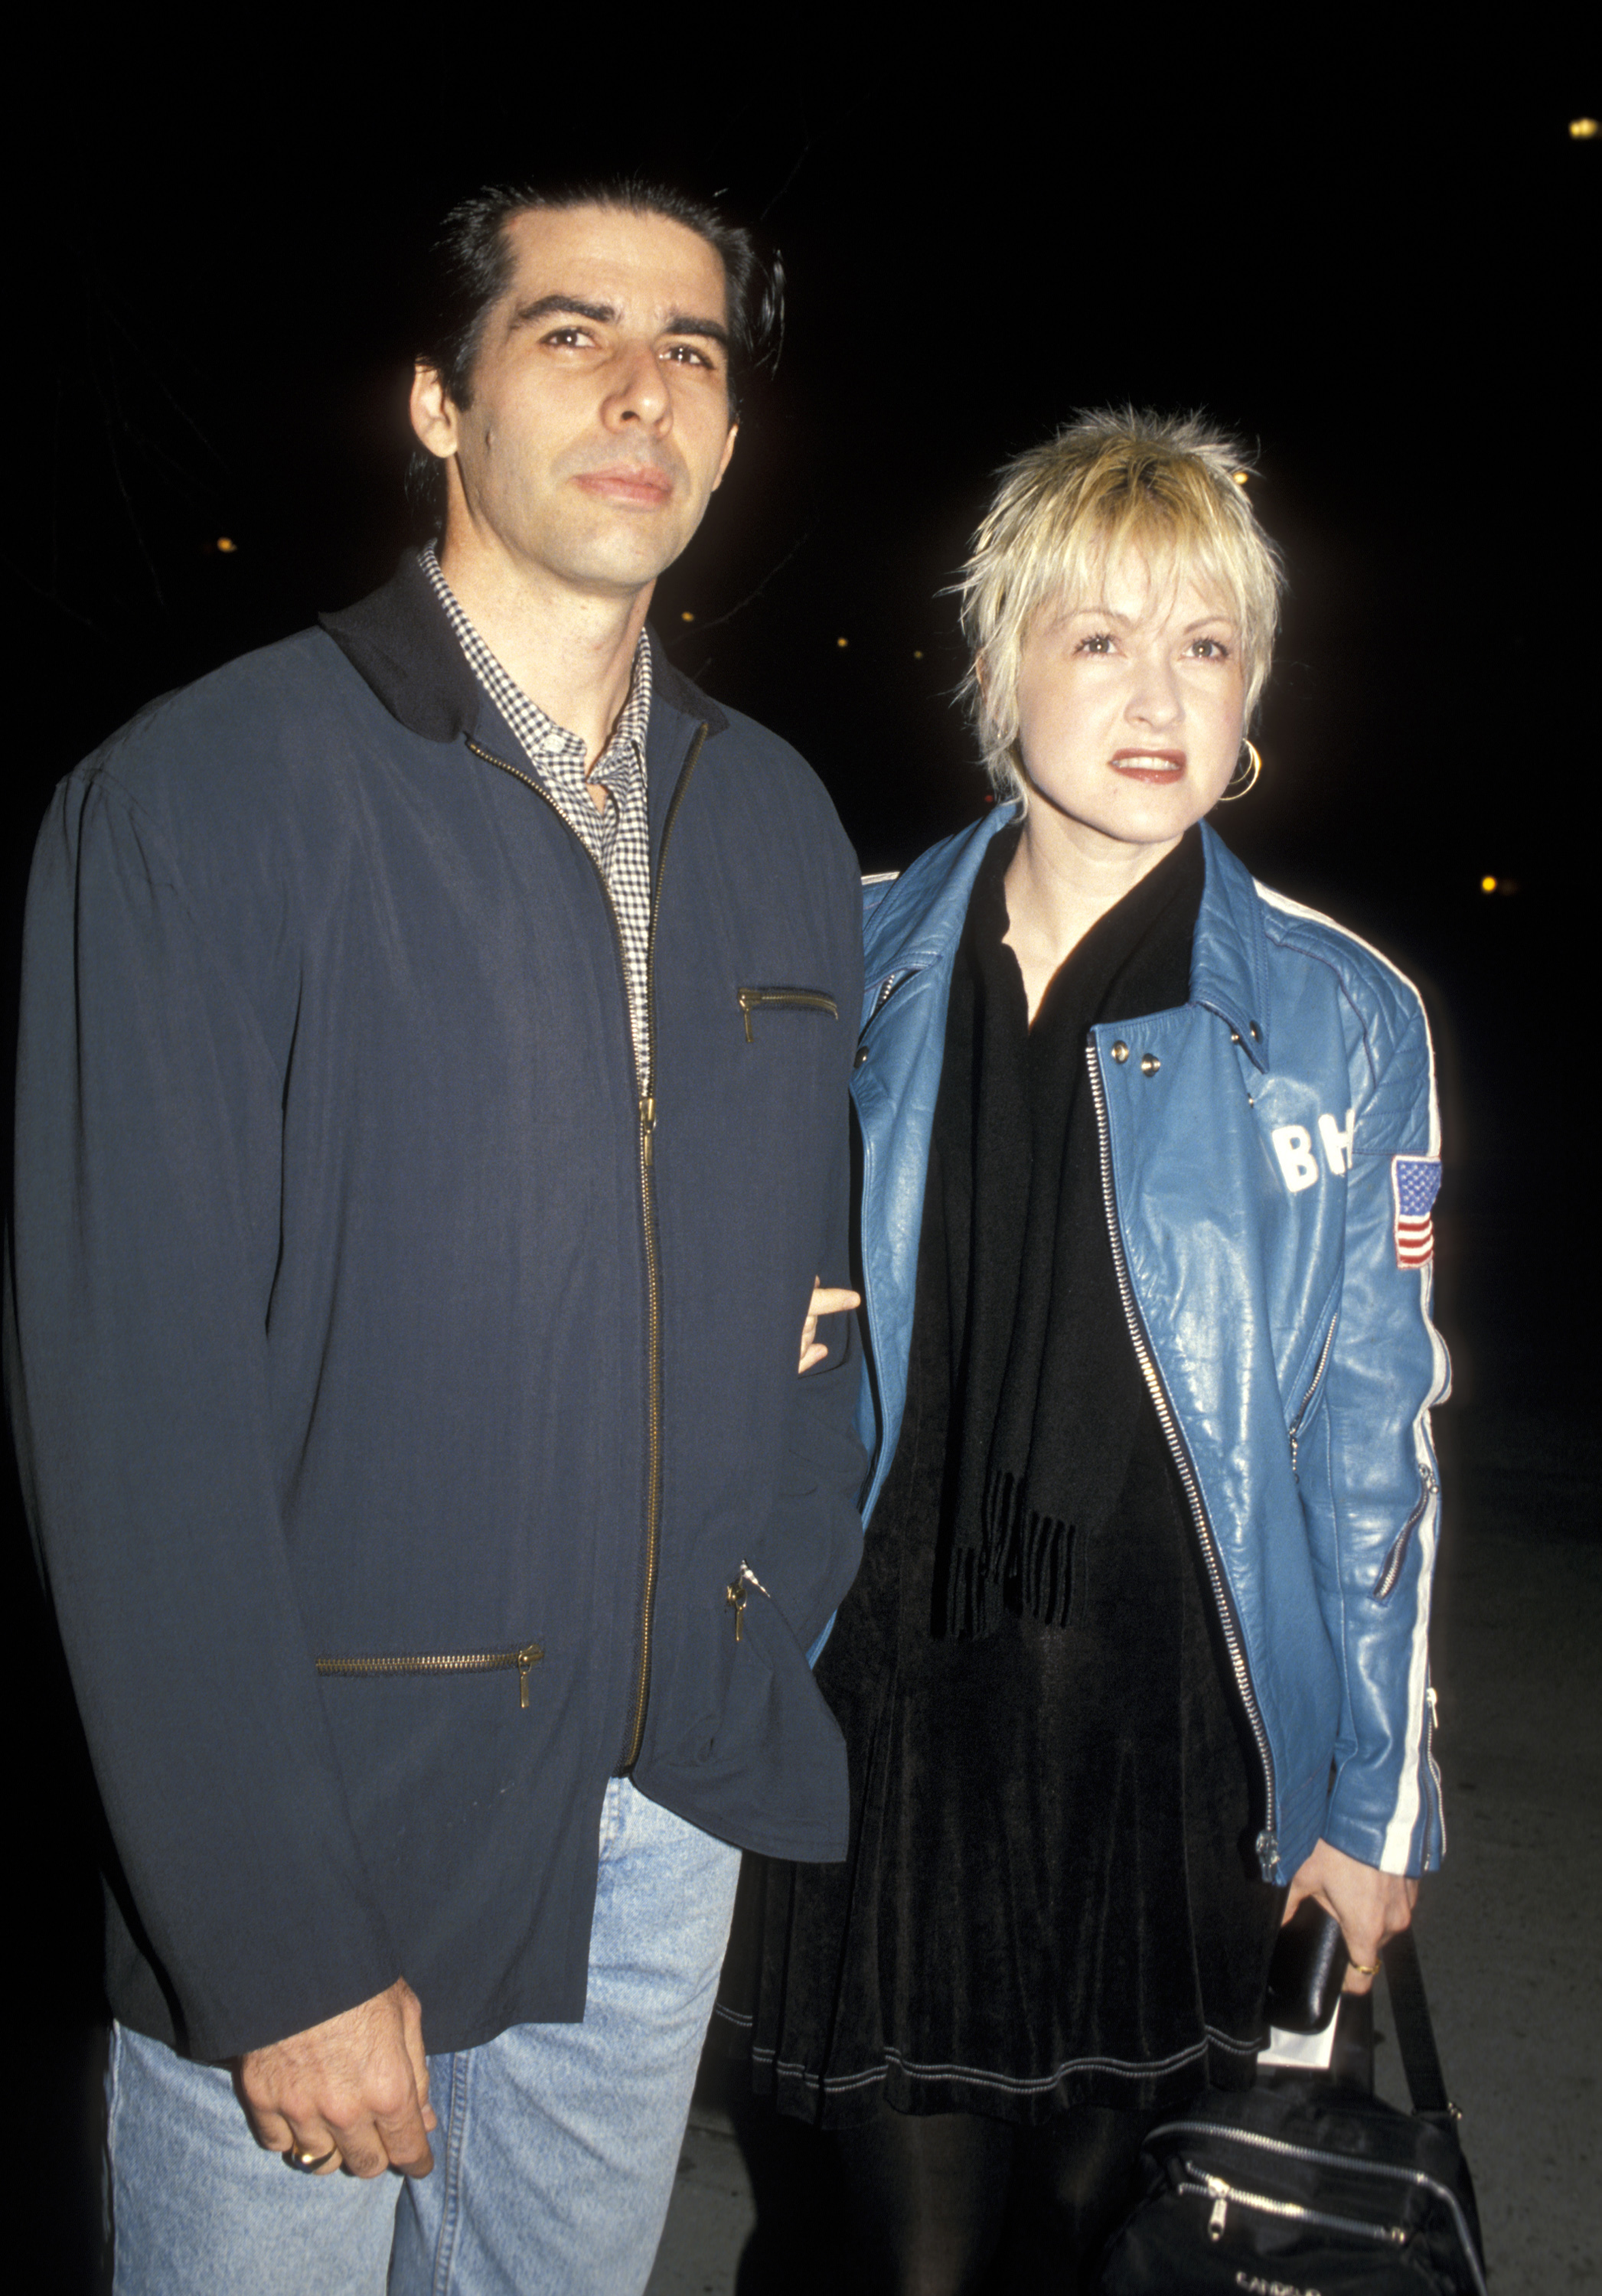 David Thornton and Cyndi Lauper at the Opening Night of "New York Rock" on March 30, 1994 | Source: Getty Images